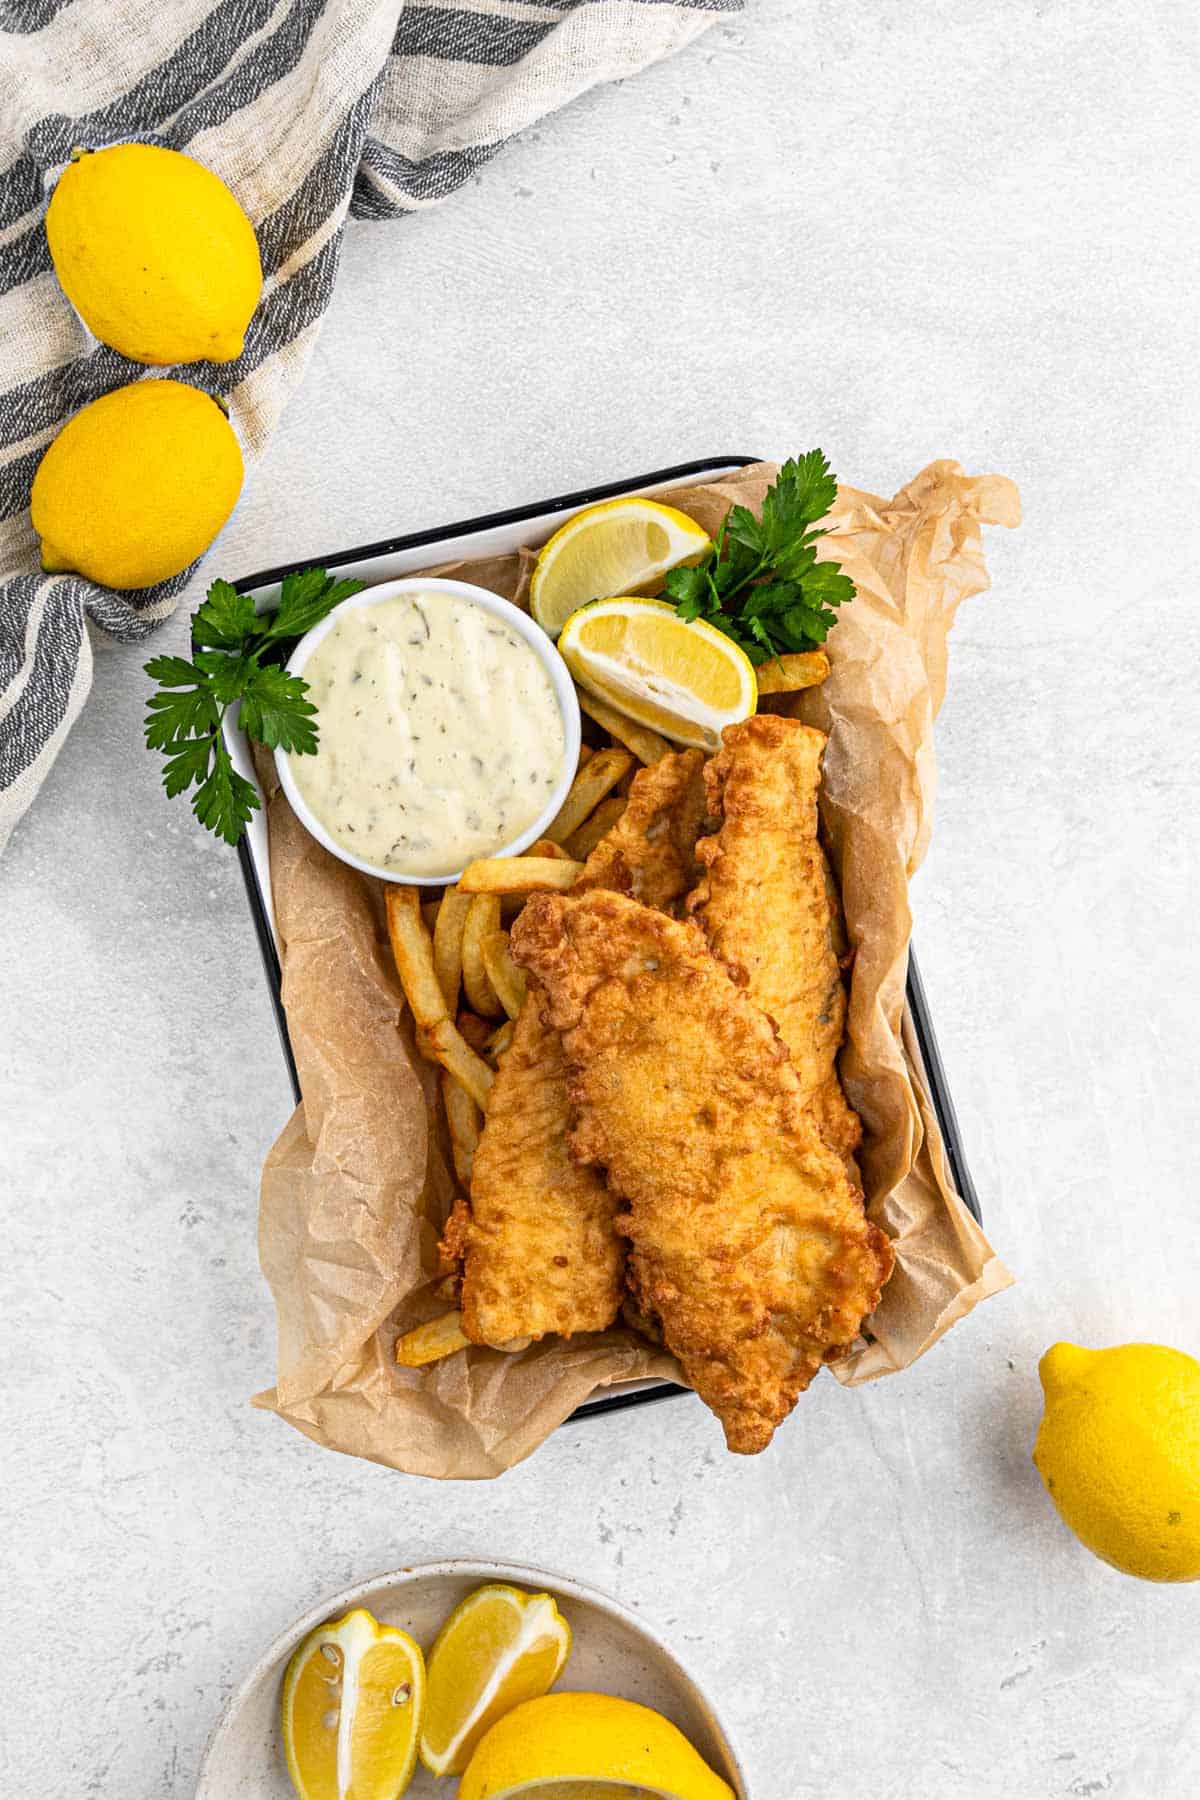 A tray of fish and chips on the table with lemons and tartar sauce.